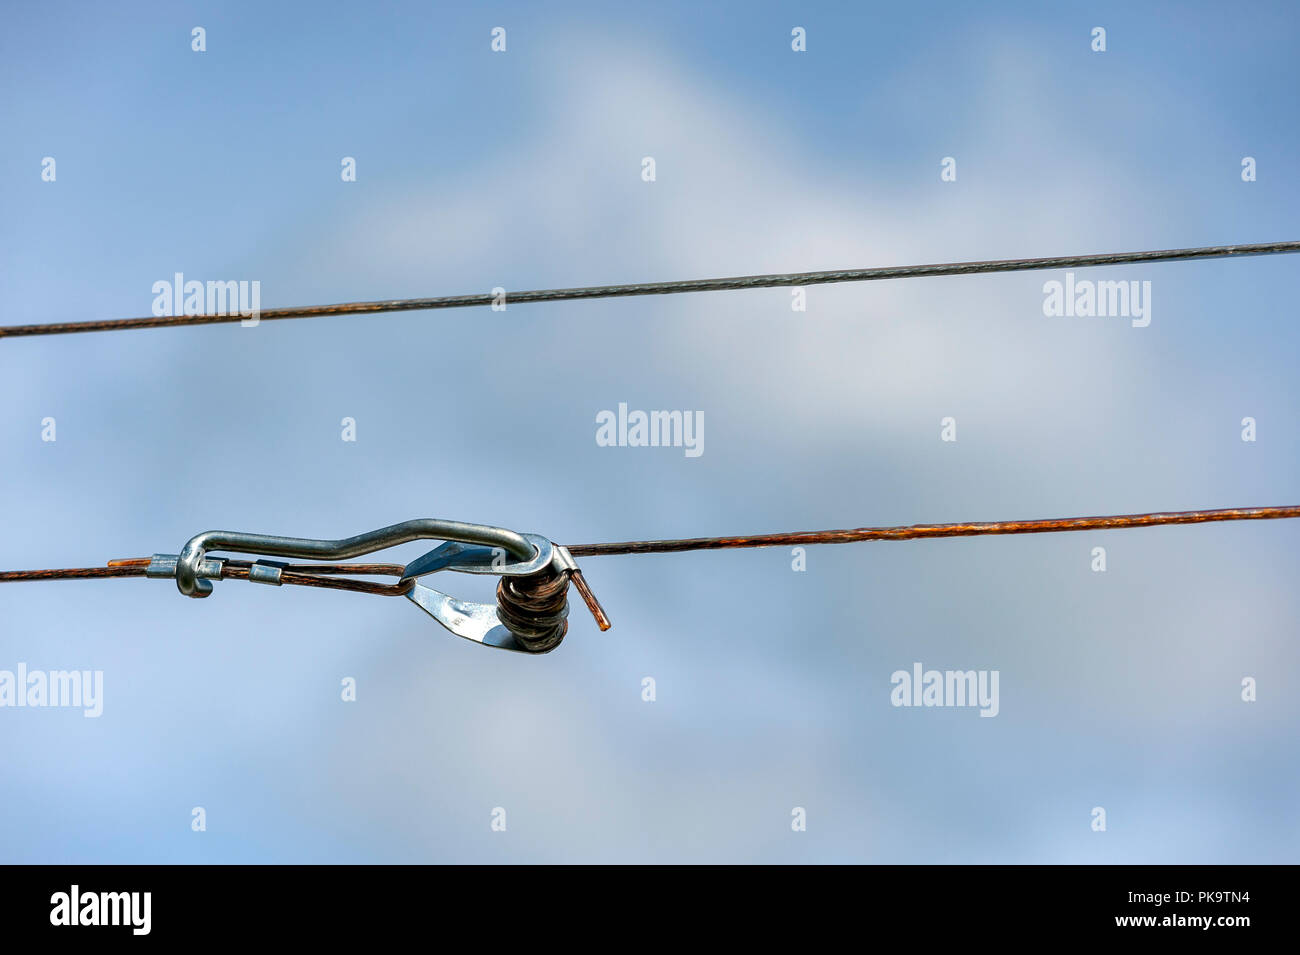 close up of a clothesline with clothesline stretcher, Stock Photo